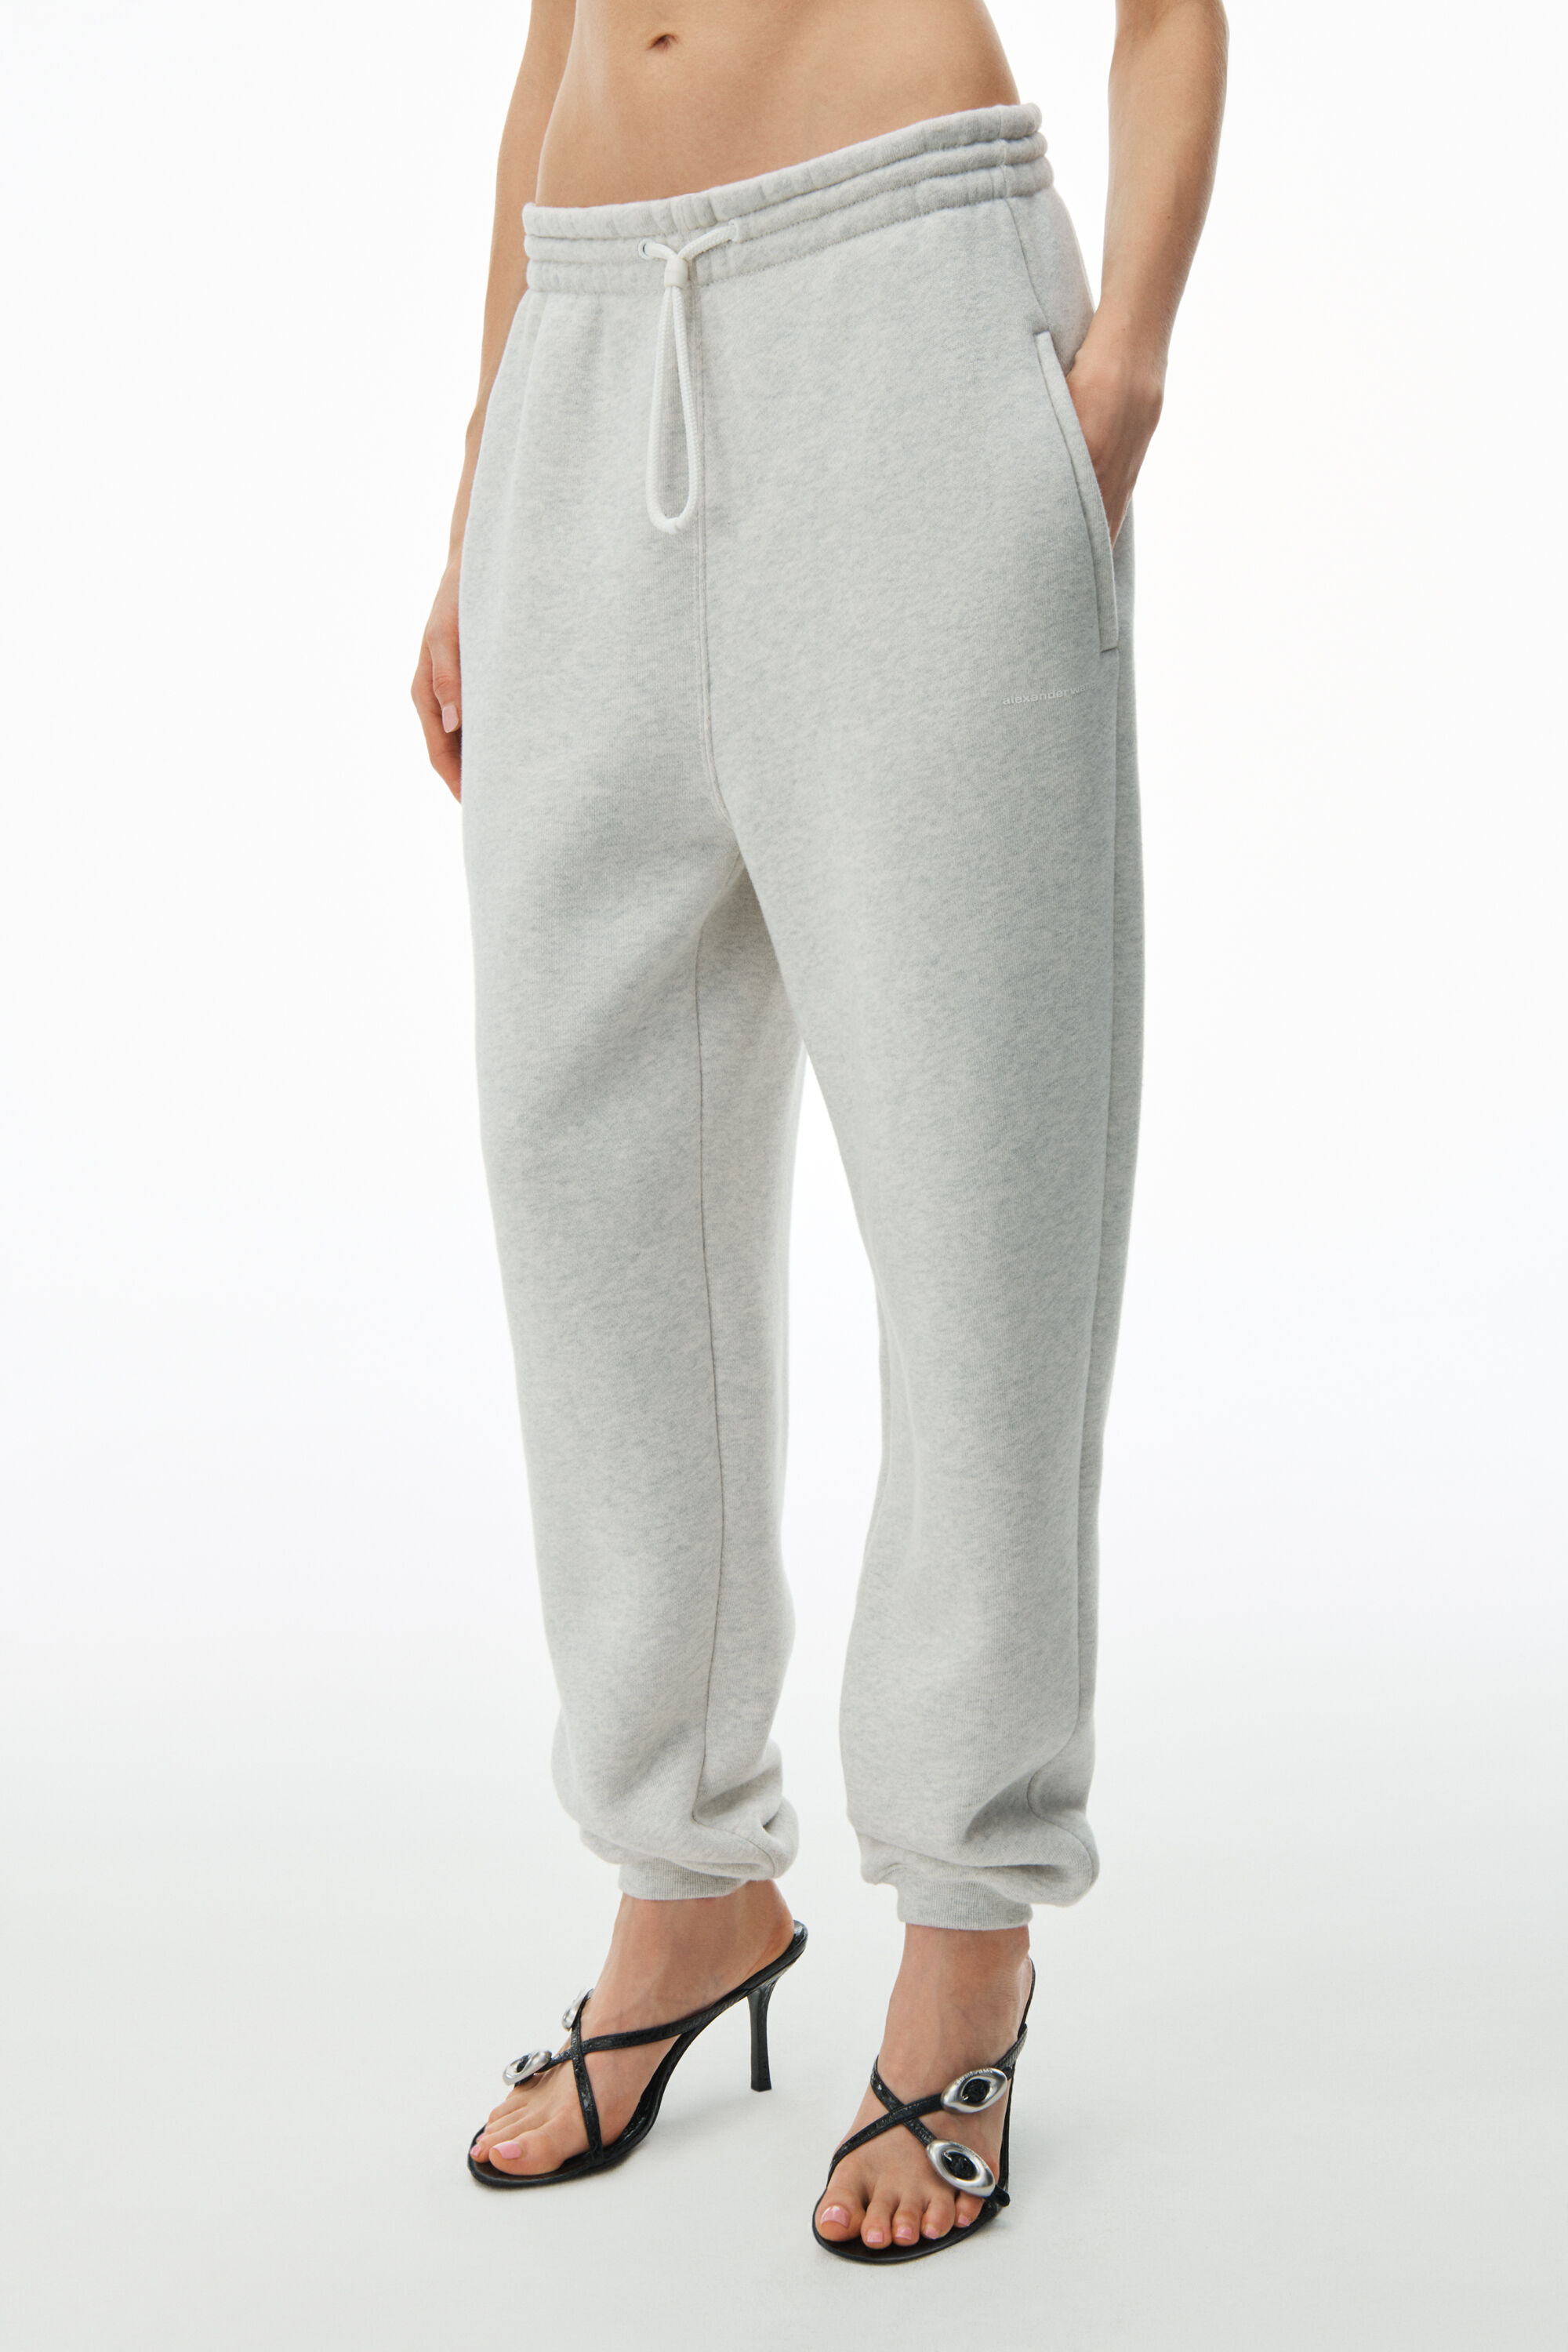 Alexander Wang Foundation Terry Classic Sweatpant in Light Heather Grey